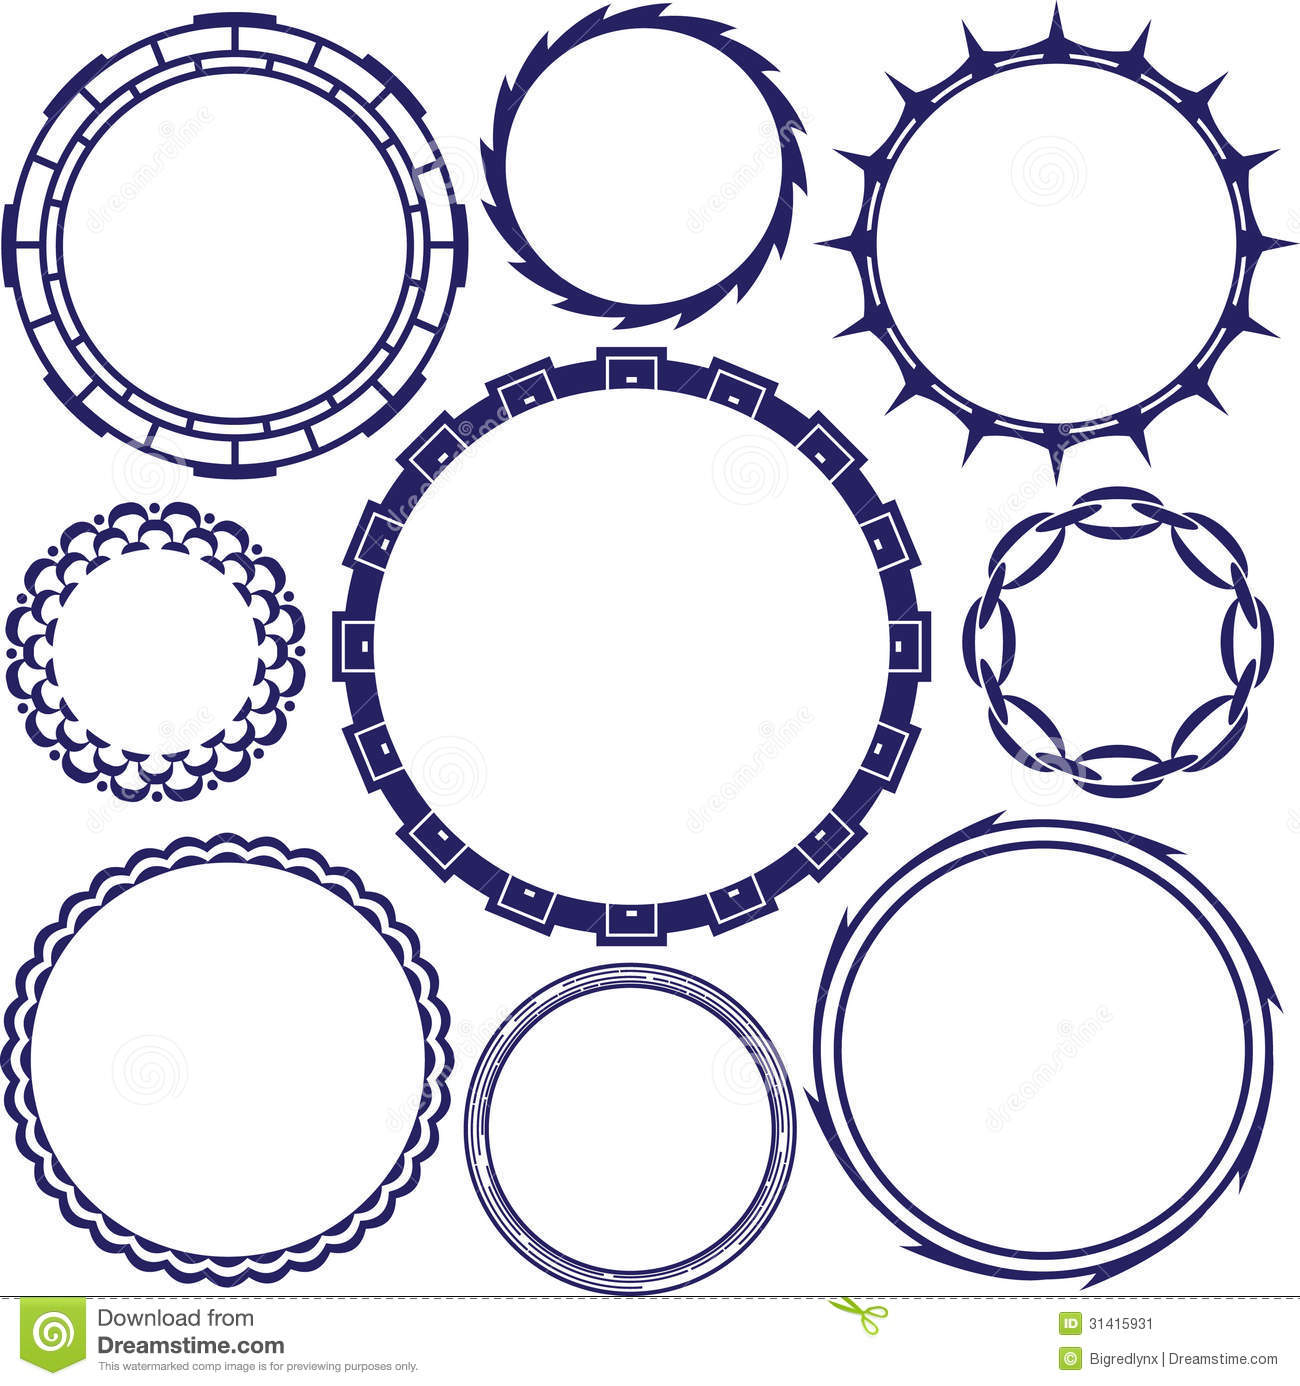 Clip Art Collection Of Several Circle And Ring Designs 